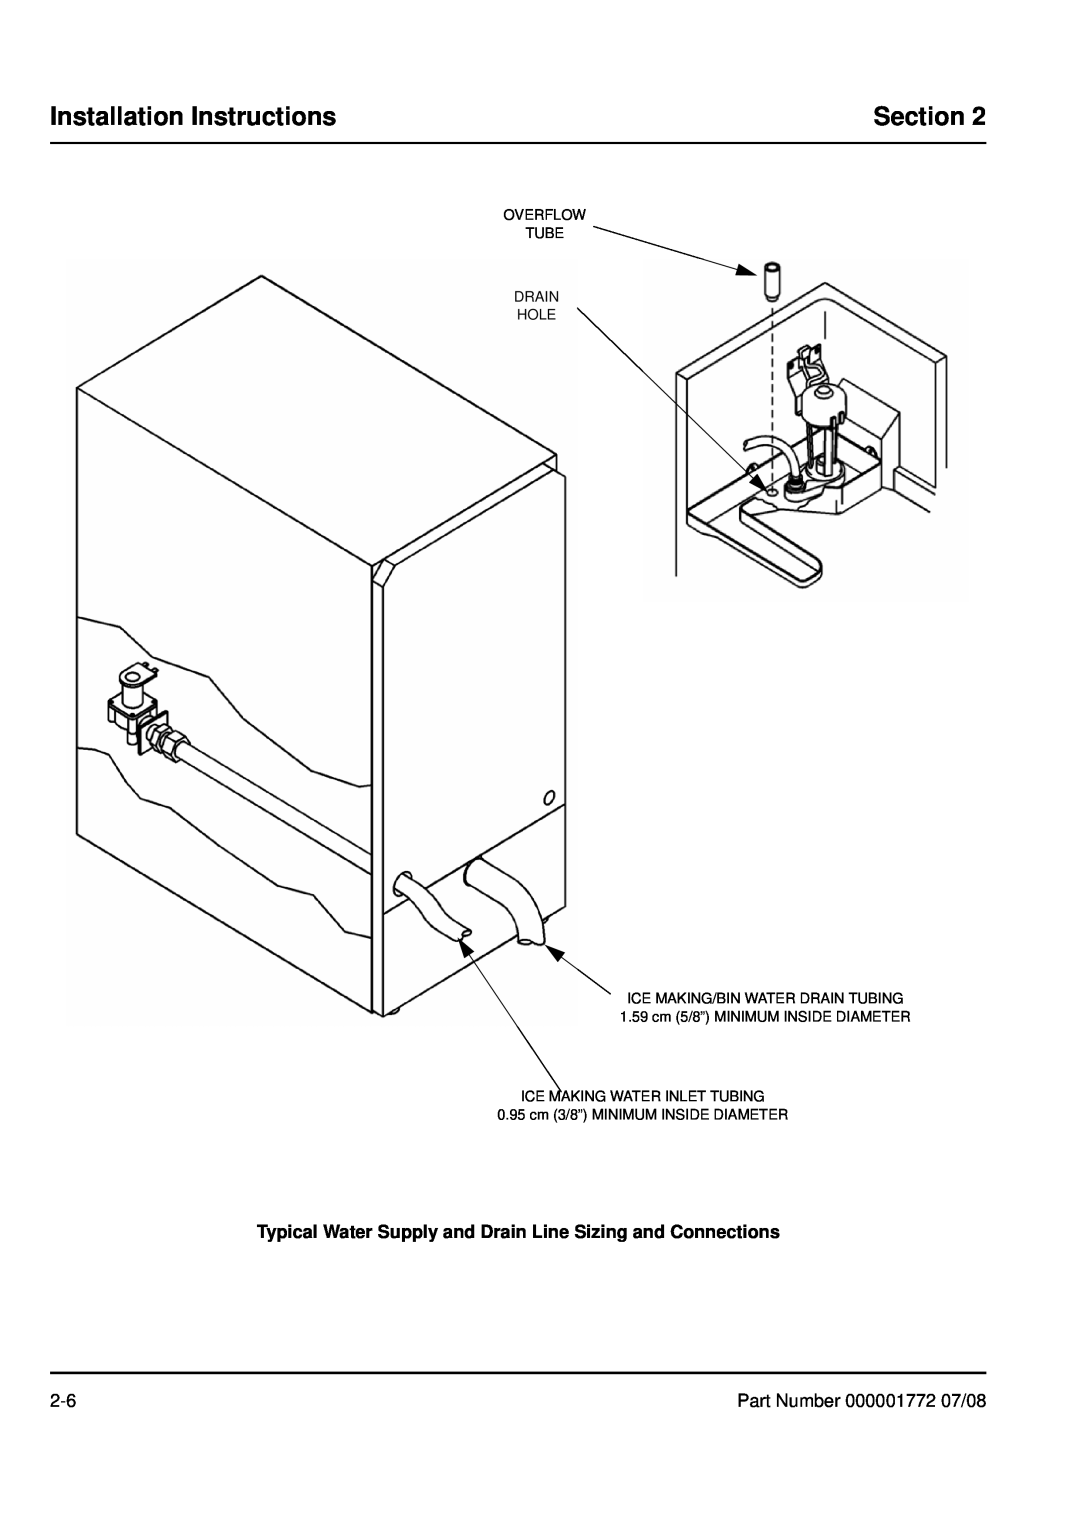 Manitowoc Ice QM30 manual Installation Instructions, Section, Overflow Tube Drain Hole, Ice Making Water Inlet Tubing 